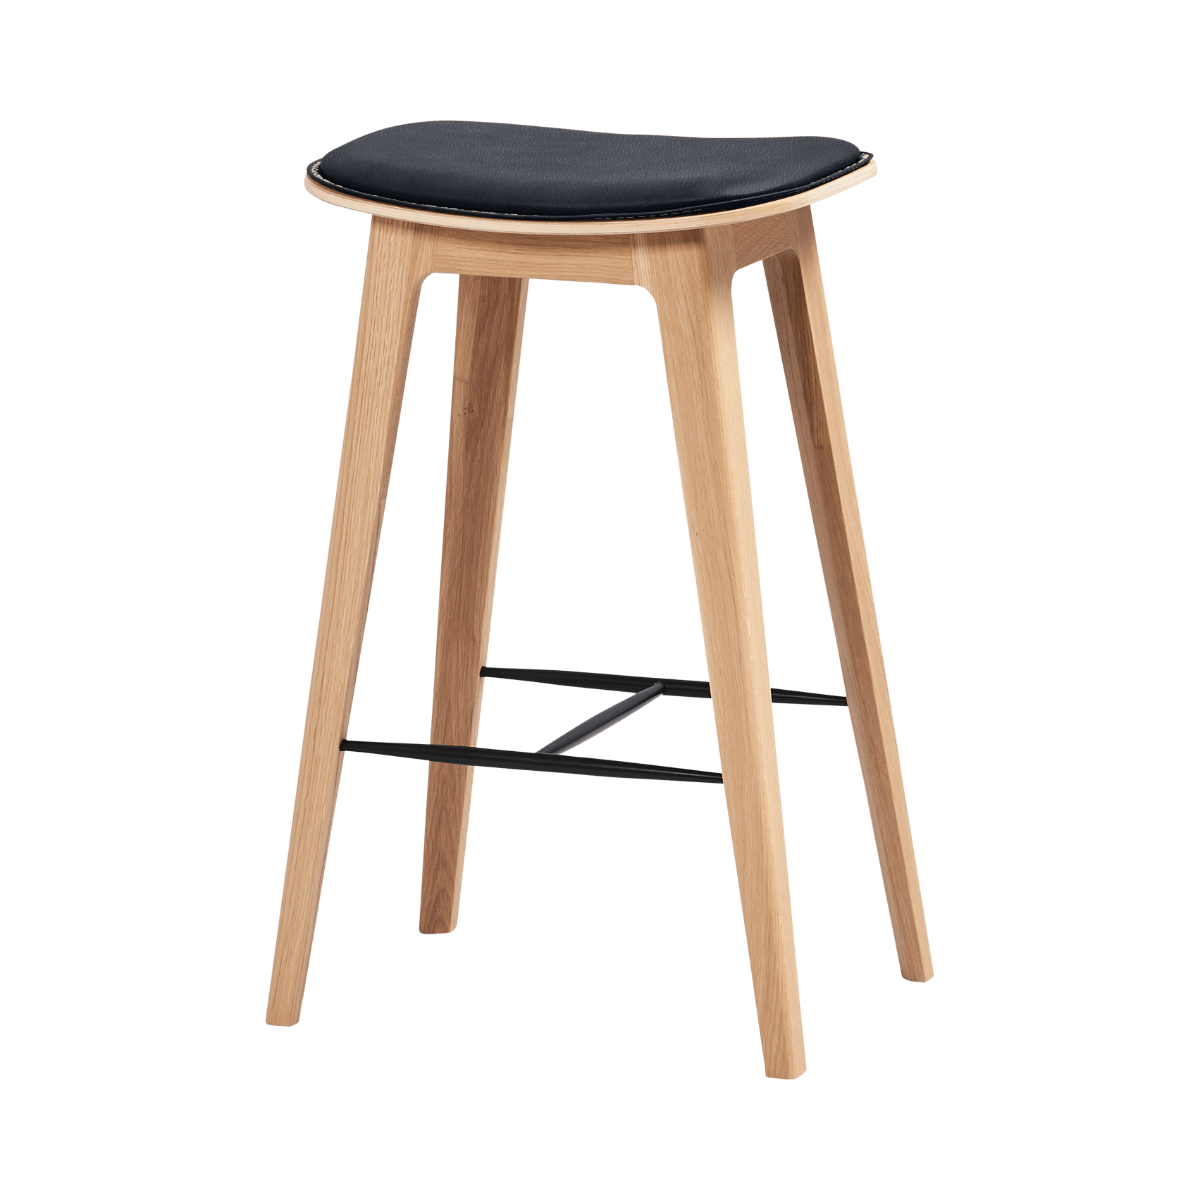 variant_8593226% | Nordic Bar Stool - Oak with stitches [Contract] - 68 cm Terra Black | SACKit